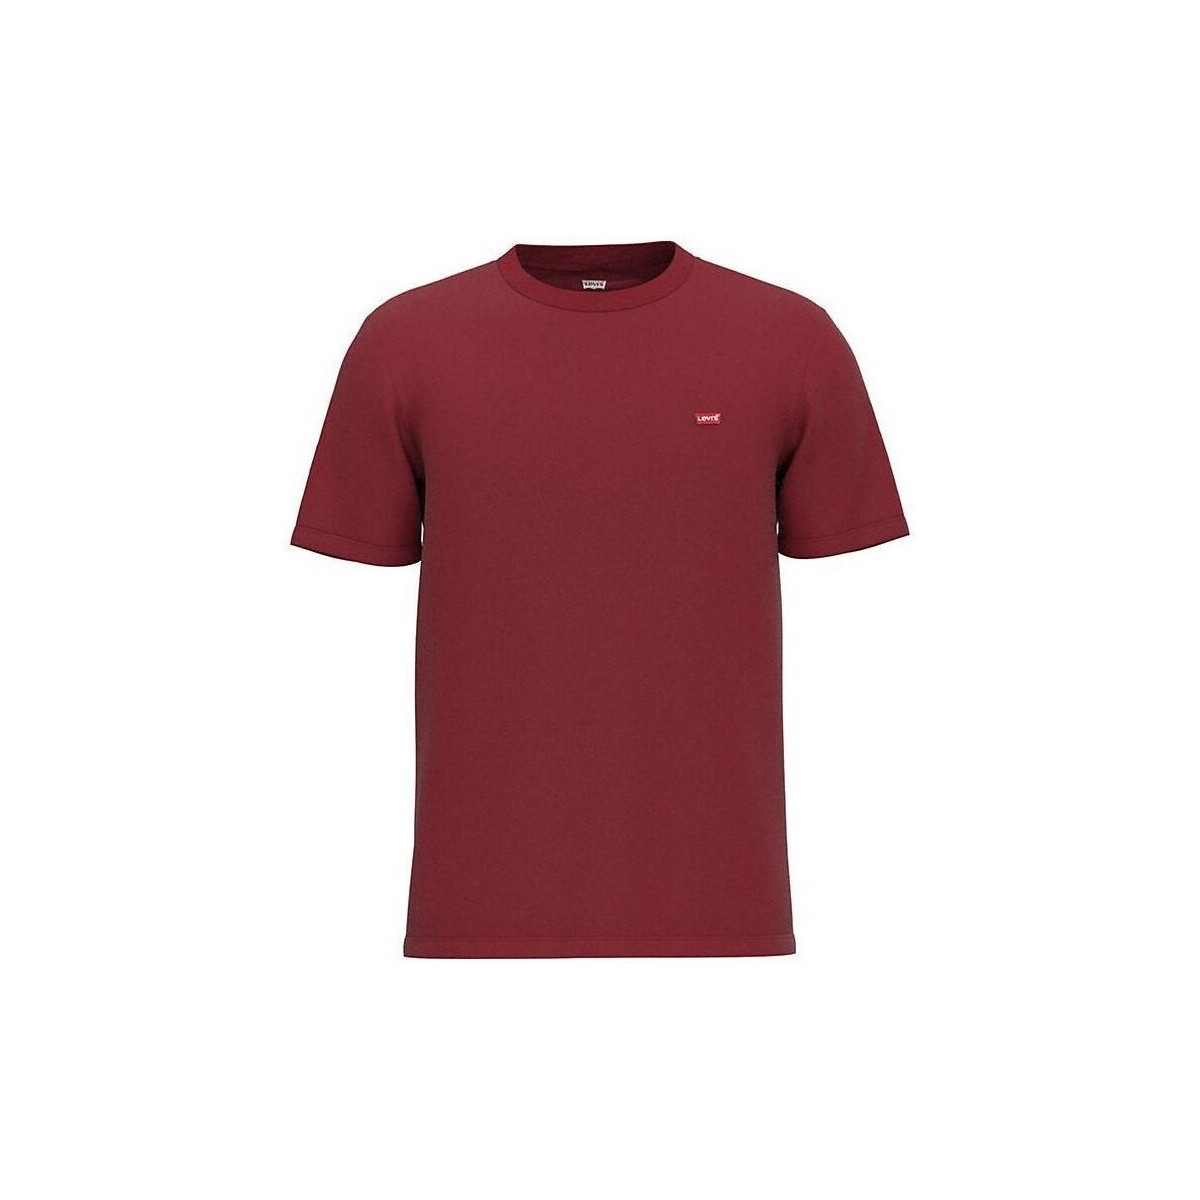 Vêtements Homme T-shirts & Polos Levi's 56605 0176 ORIGINAL TEE-RHYTMIC RED Rouge